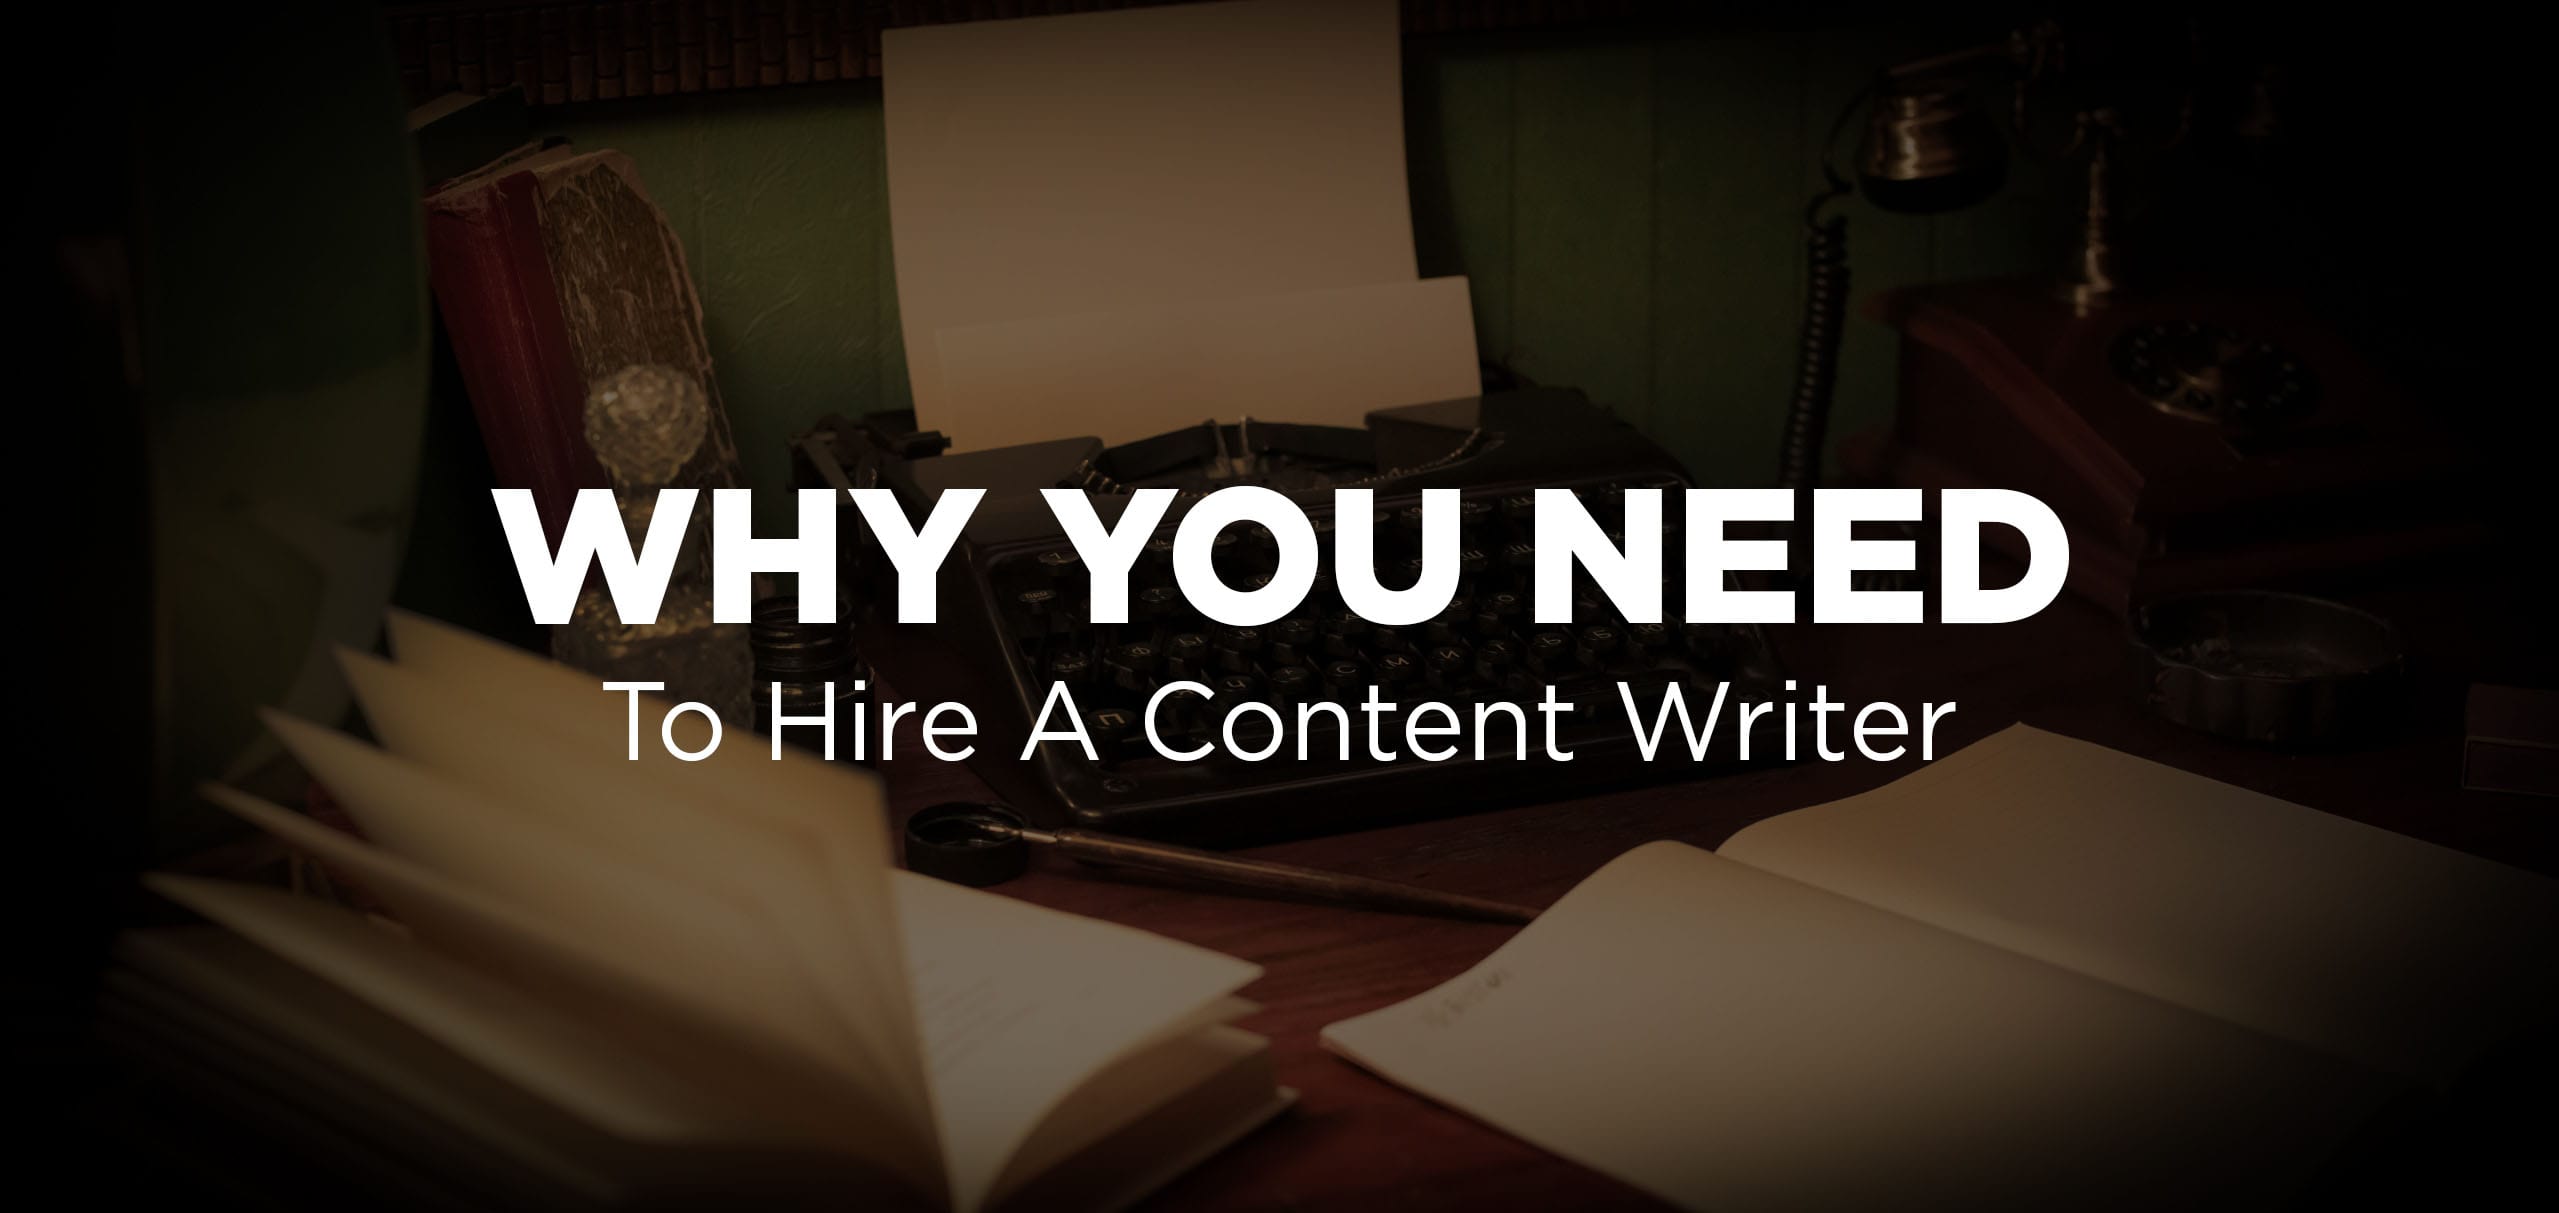 Why you need to hire a content writer